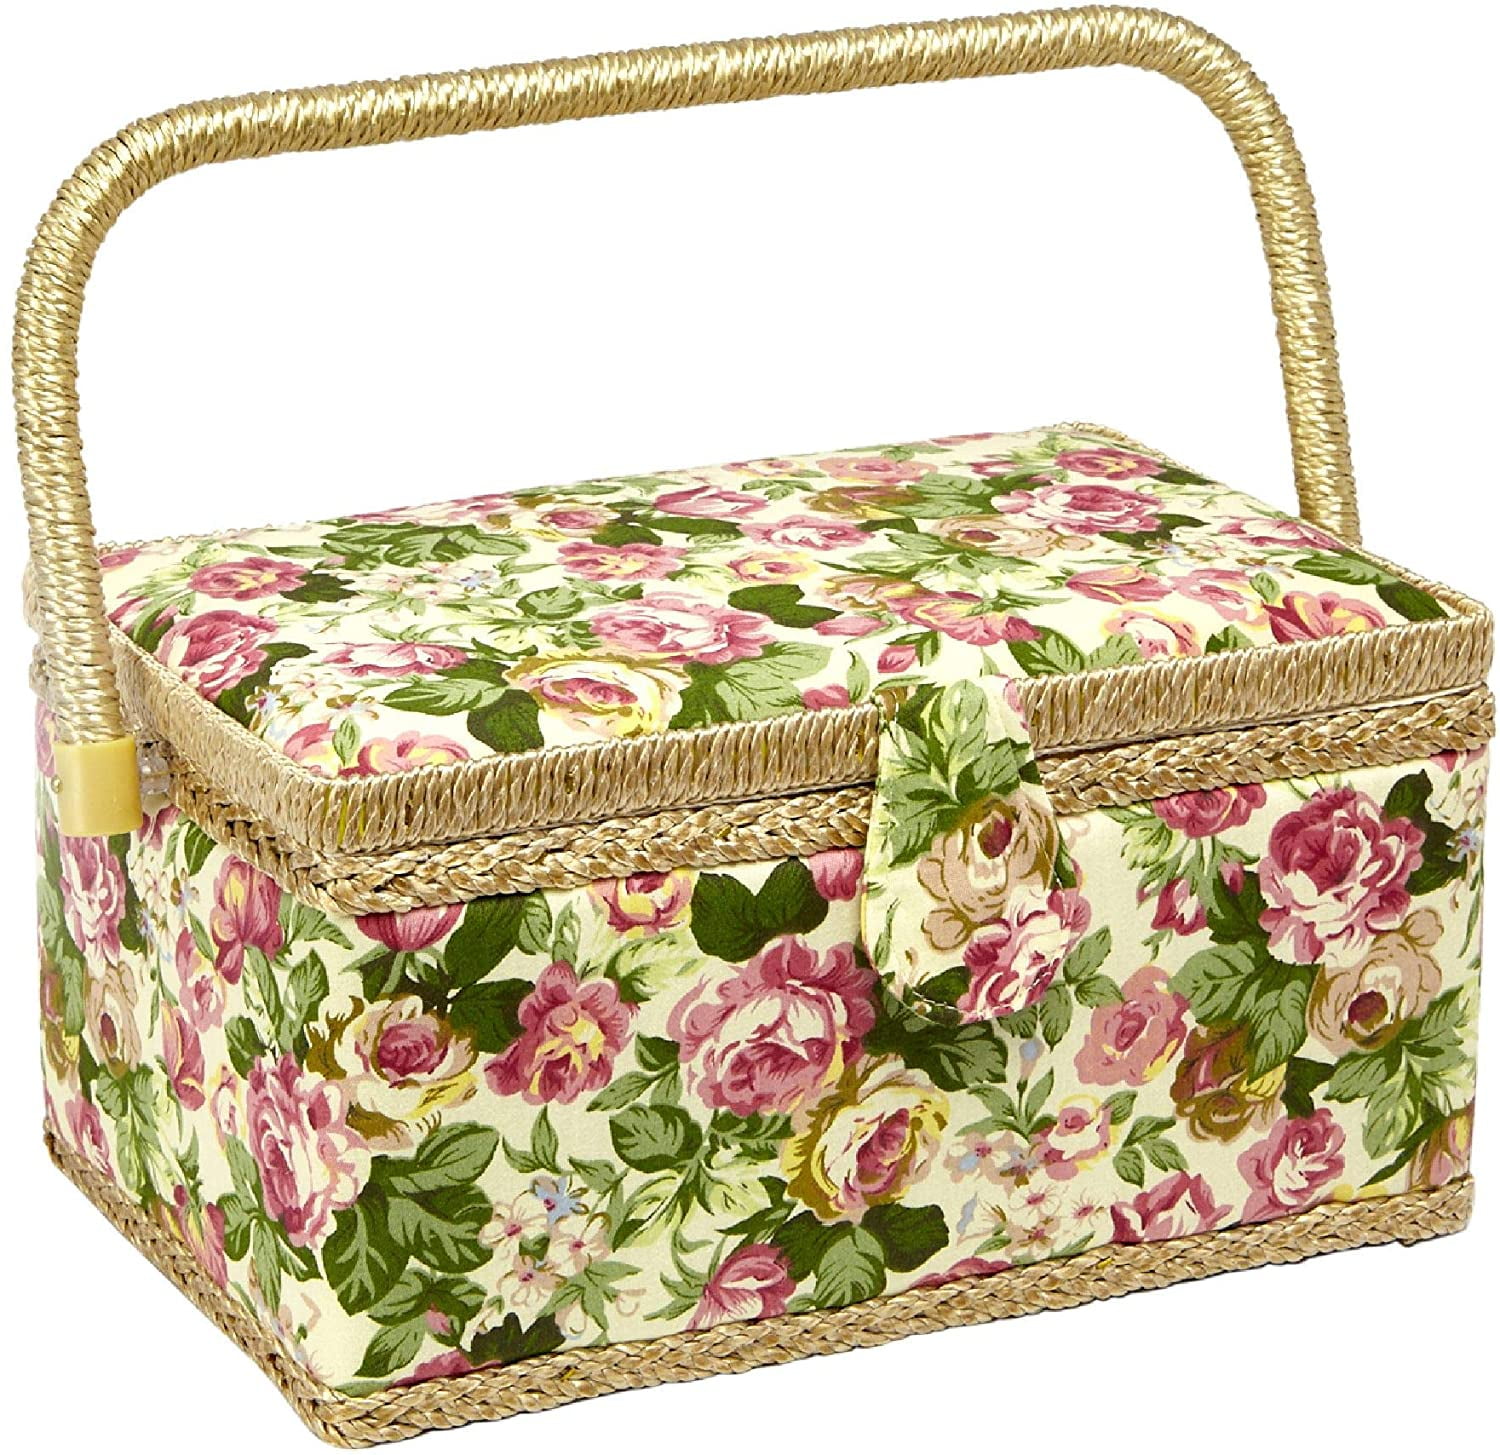 Kit Storage Box Removable Tray Sewing Basket With Floral Print Design Pin And